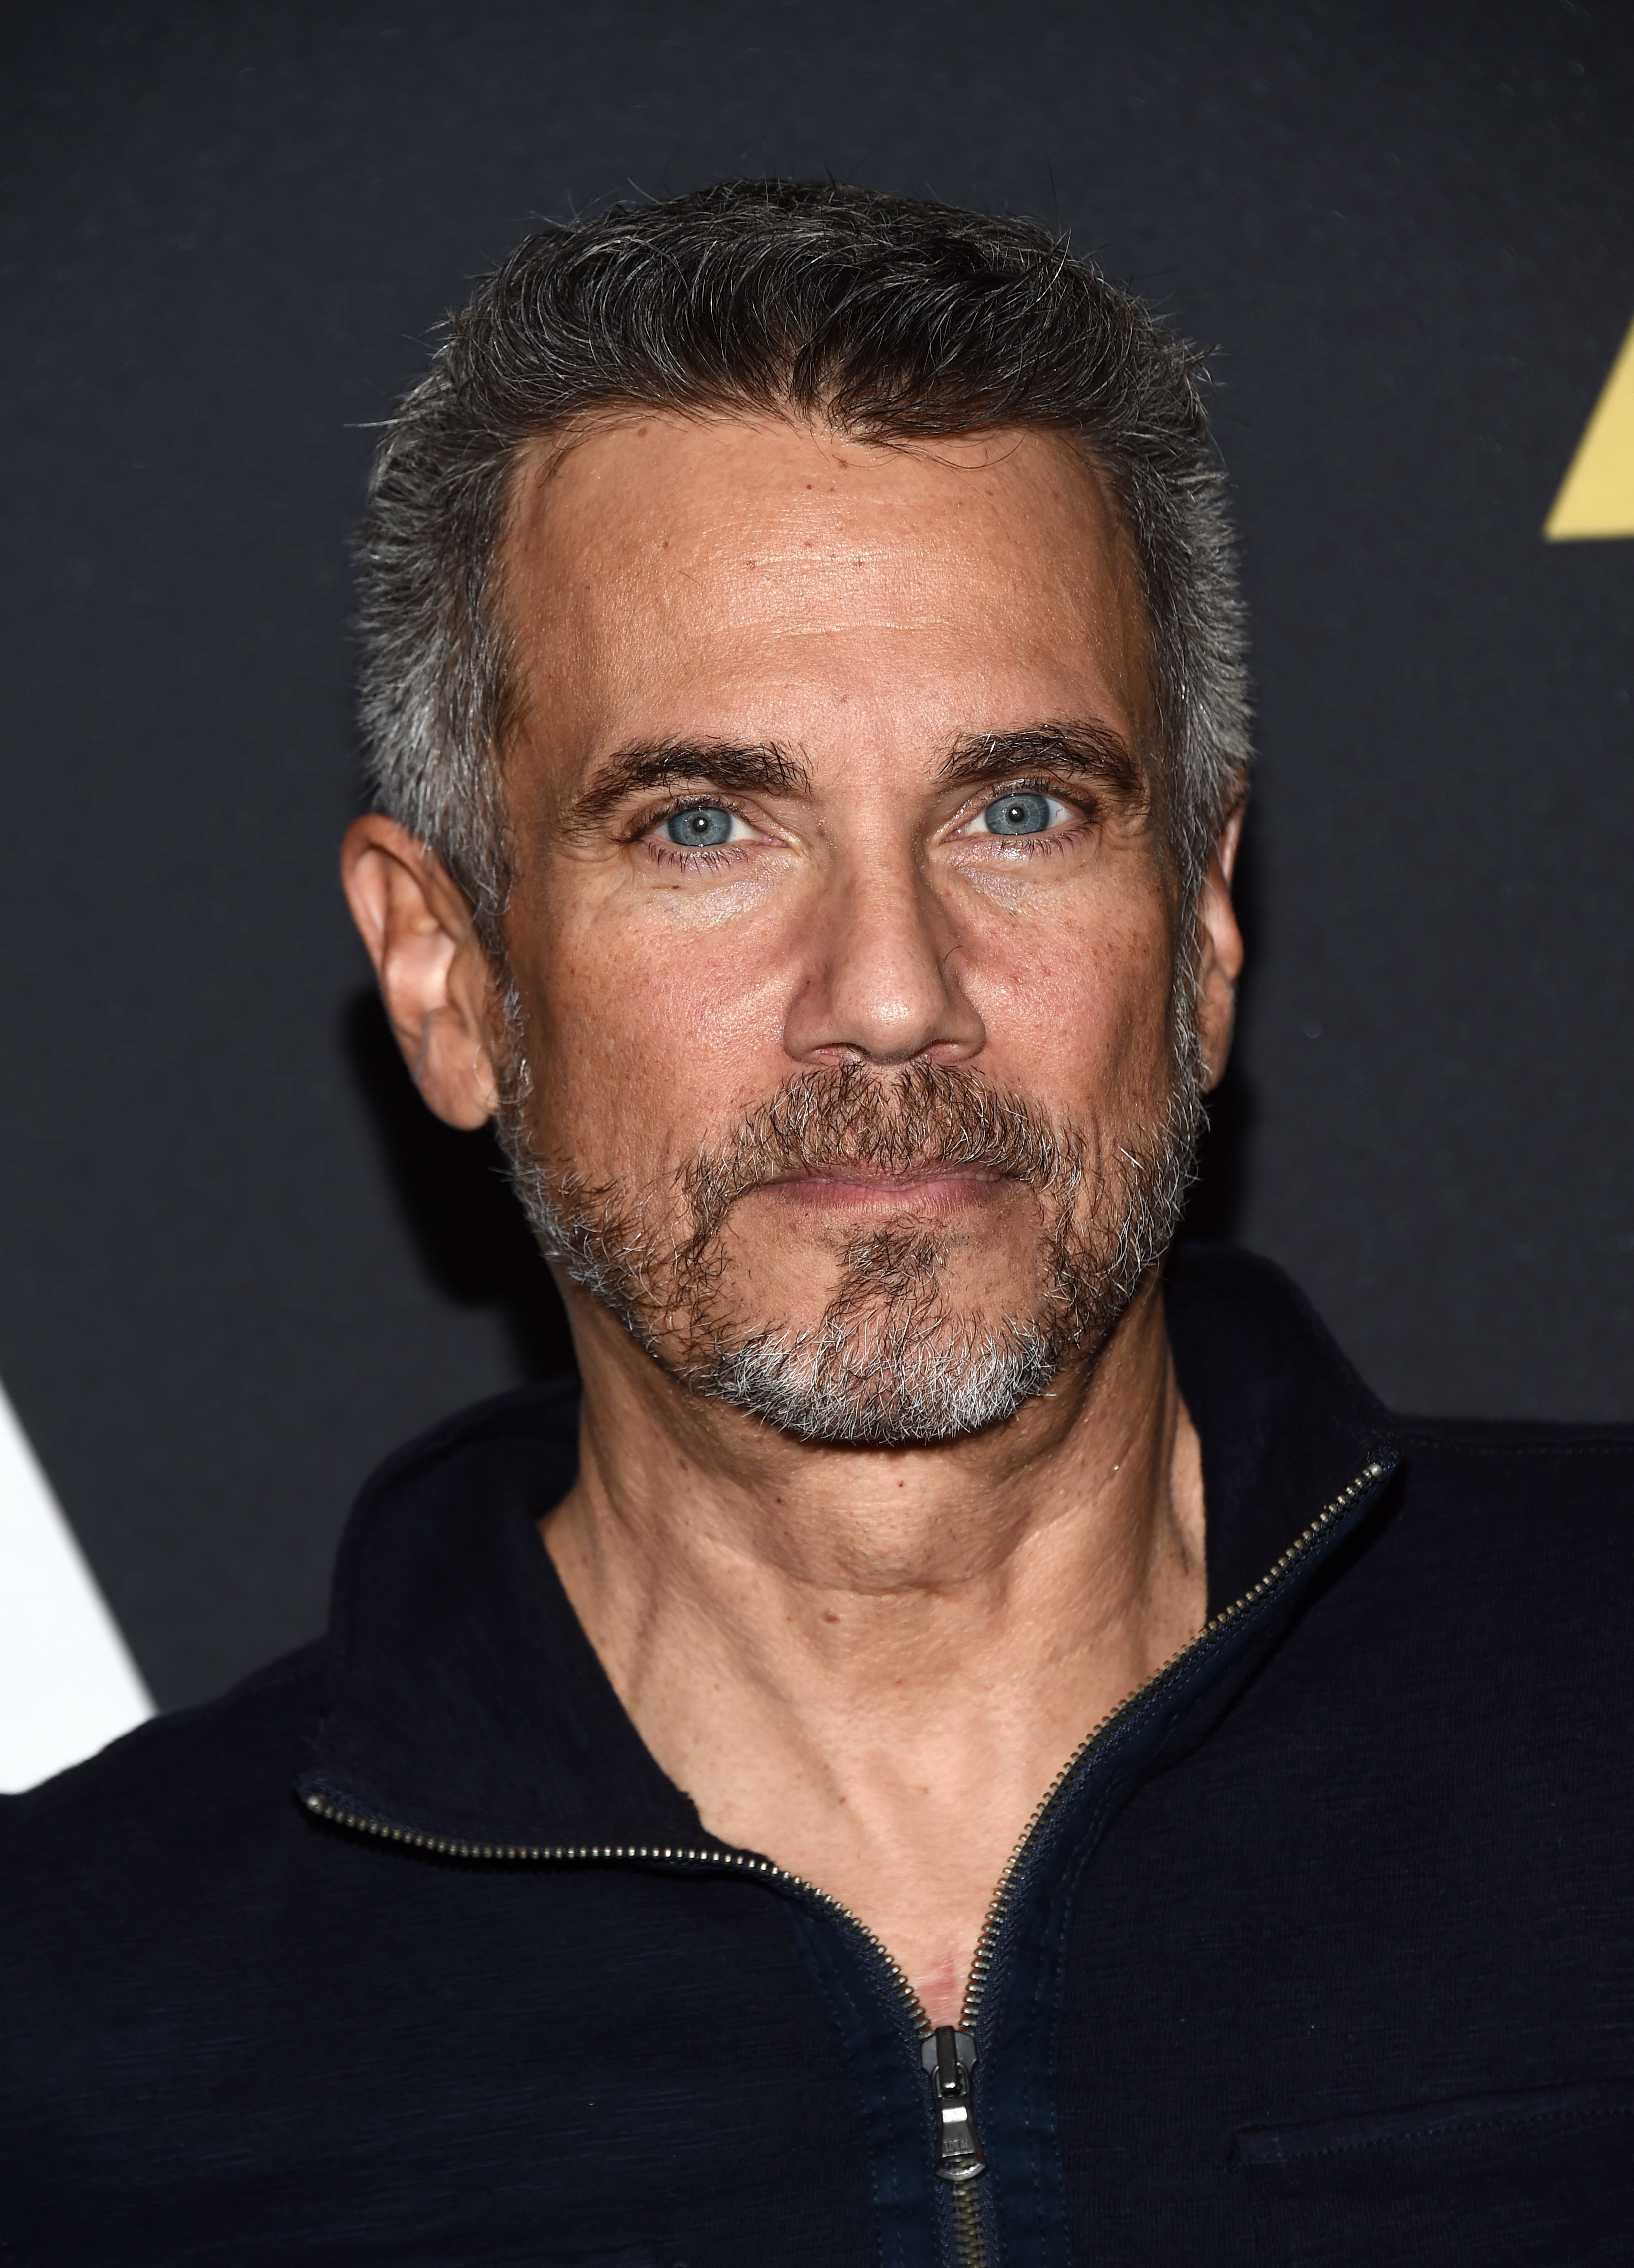 Actor Robby Benson arrives at the Academy's 25th Anniversary Screening of "Beauty And the Beast" at the Samuel Goldwyn Theater on May 9, 2016 in Beverly Hills, California┃Source: Getty Images